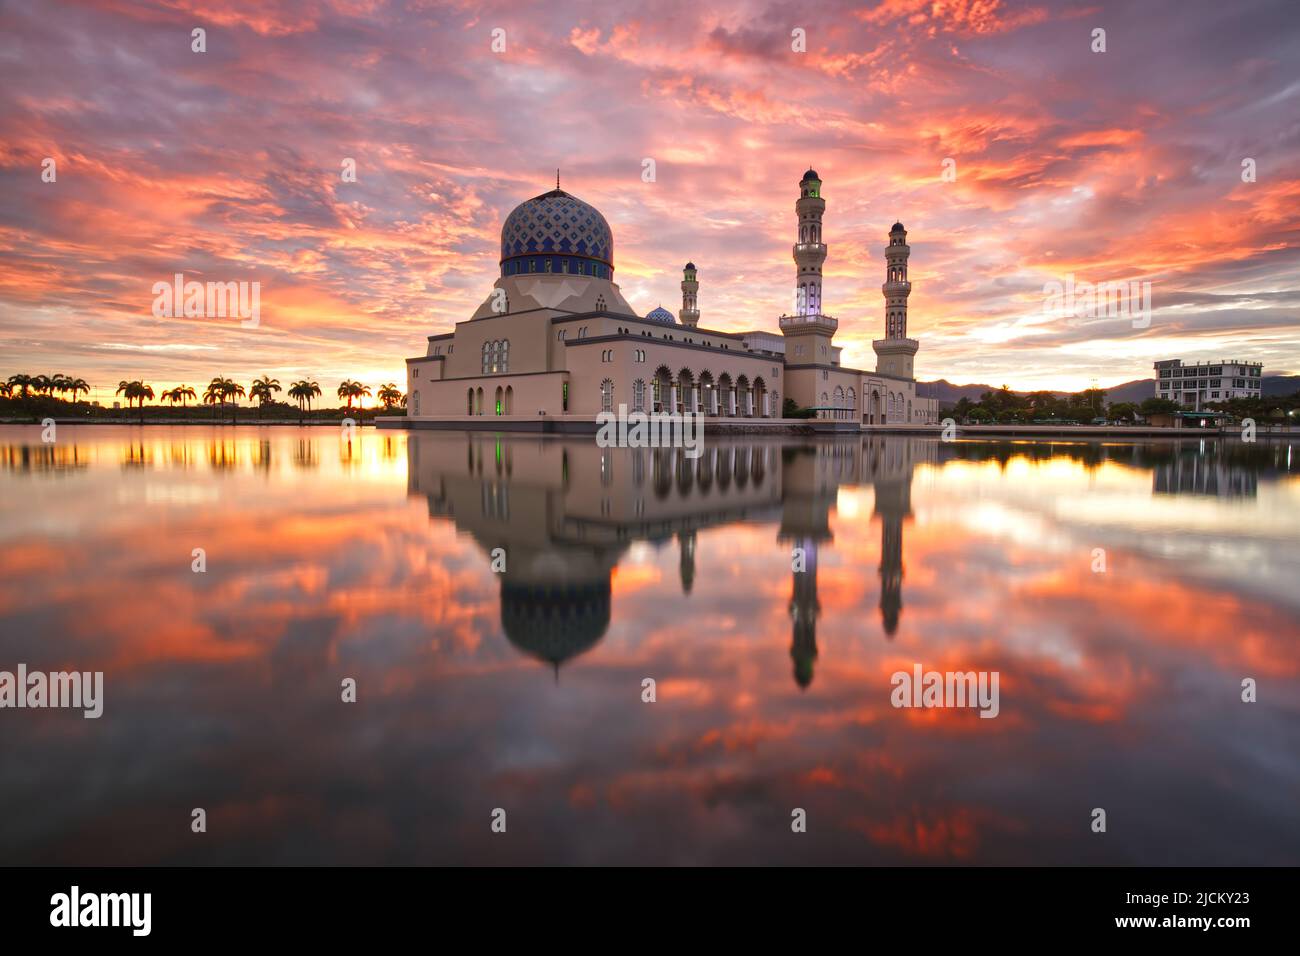 The Kota Kinabalu City Mosque is the second main mosque in Kota Kinabalu after State Mosque in Sembulan. Stock Photo